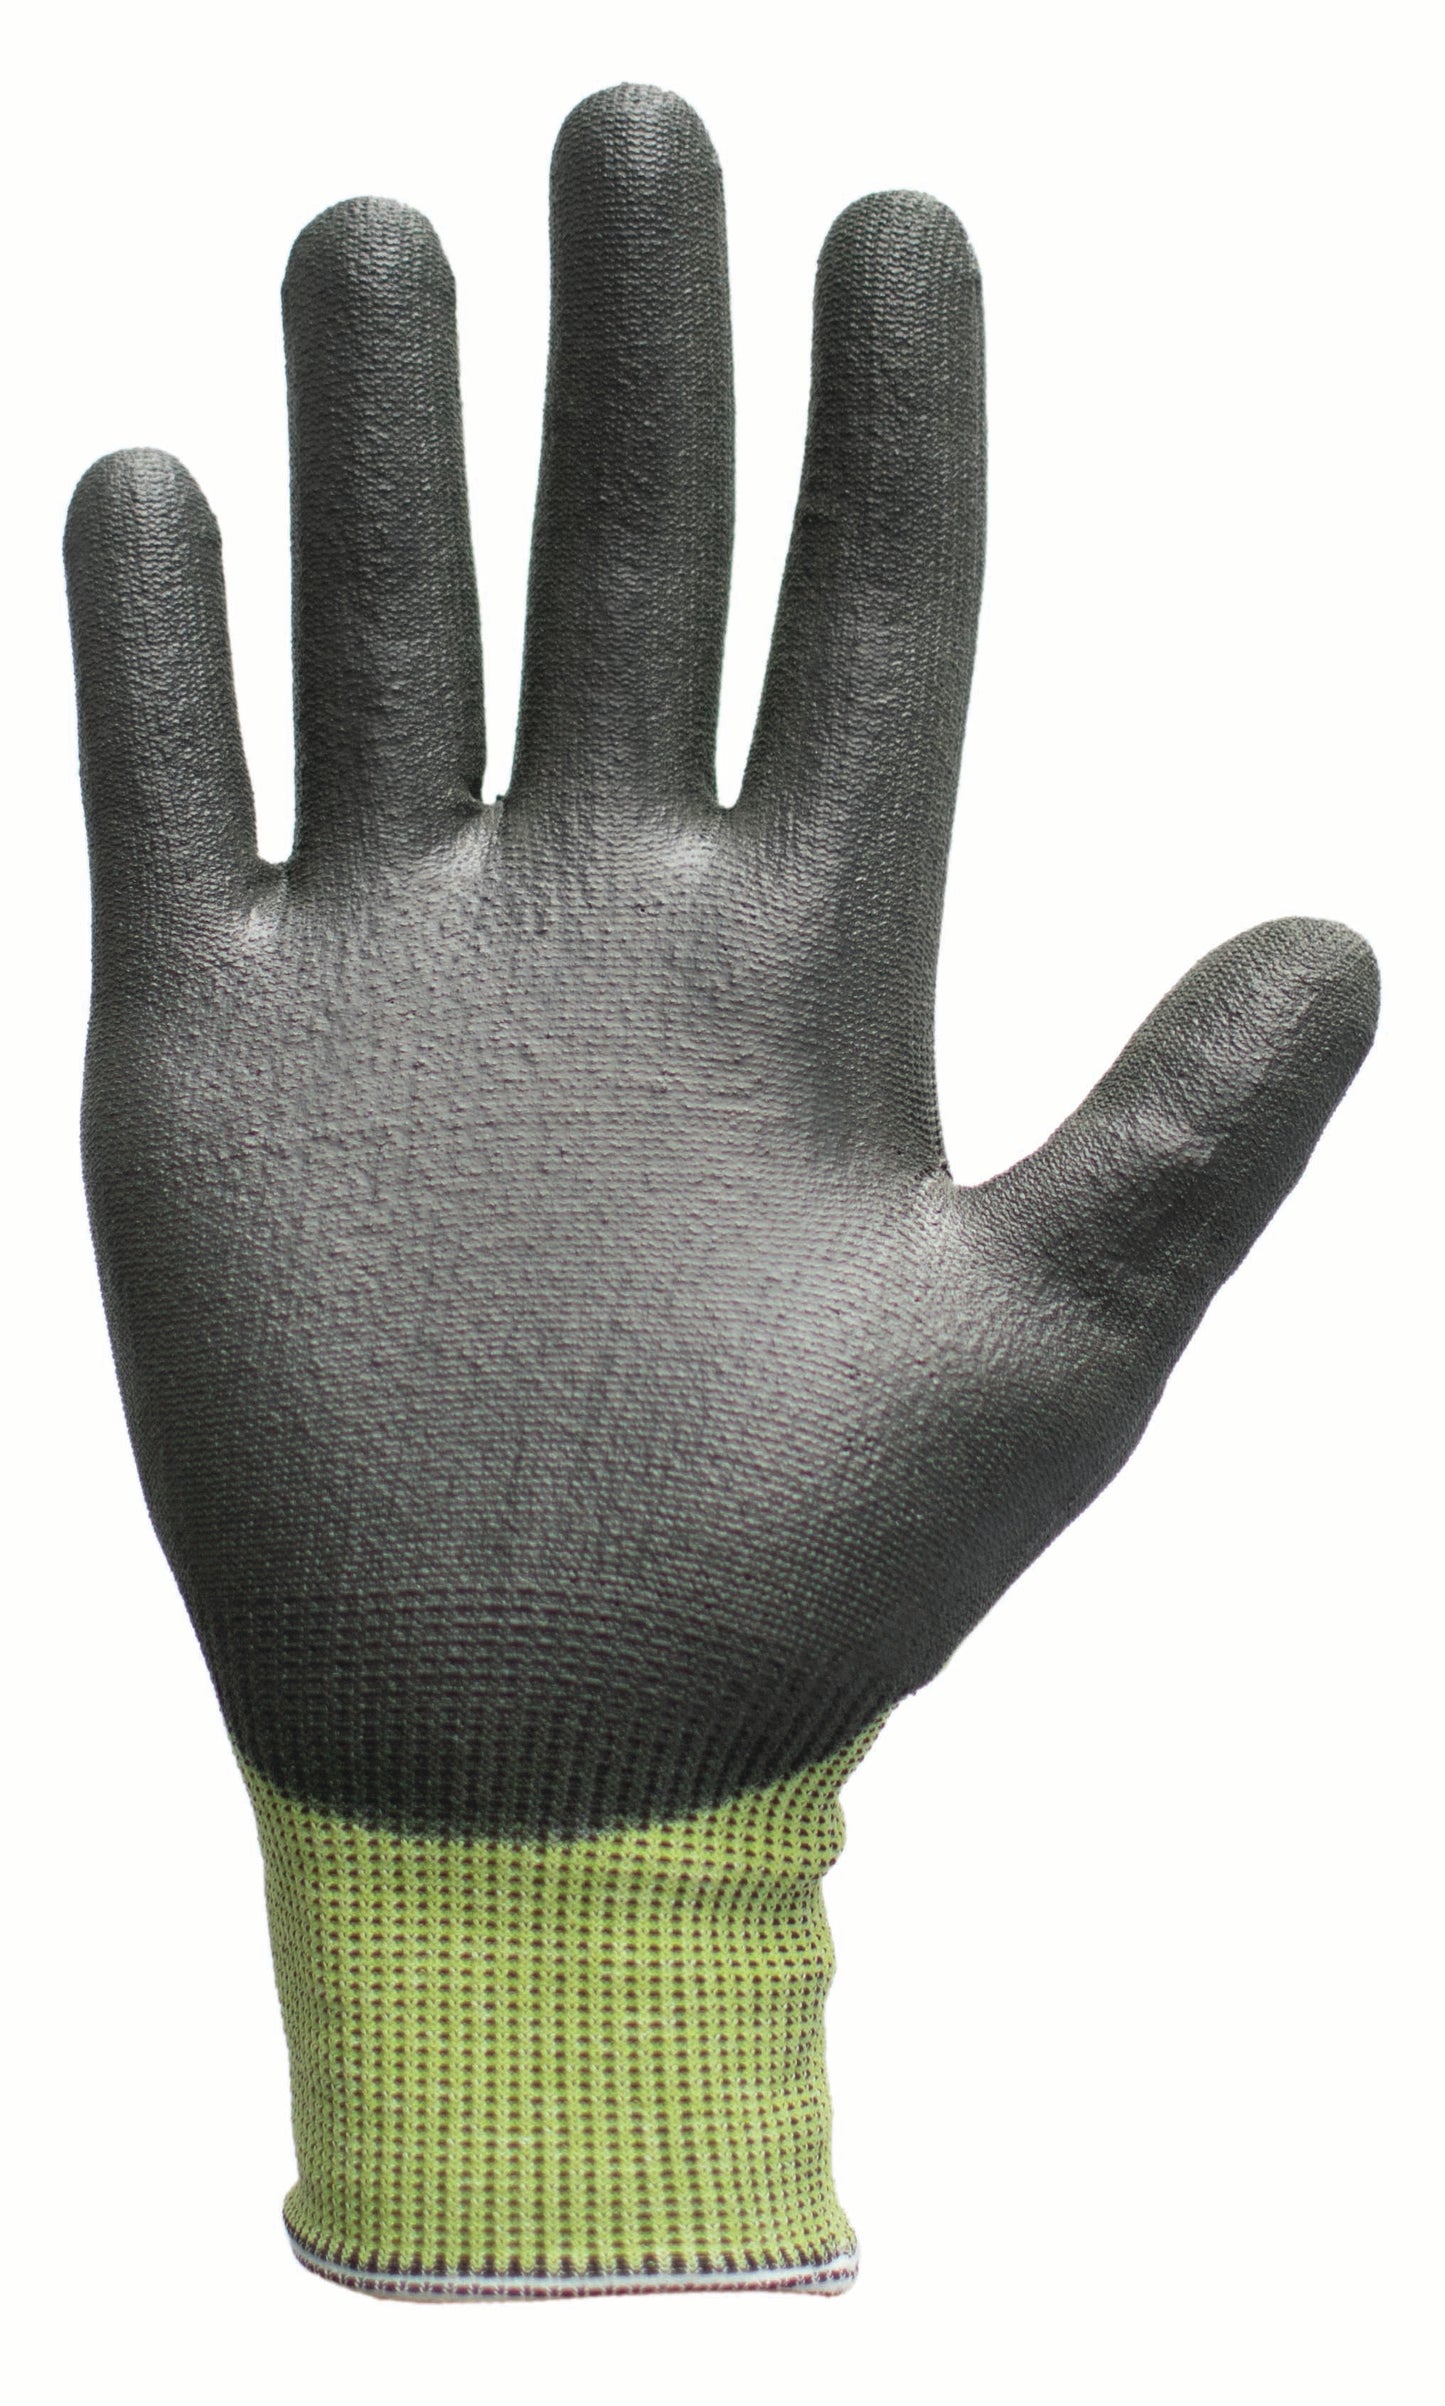 This Eco-friendly Traffi®TG7360 X-Dura LXT® Ultrafine Polyurethane Coated Green 18-gauge Cut Level A6 Safety Gloves are Carbon Neutral Certified, repels water and oil while providing touchscreen compatibility.